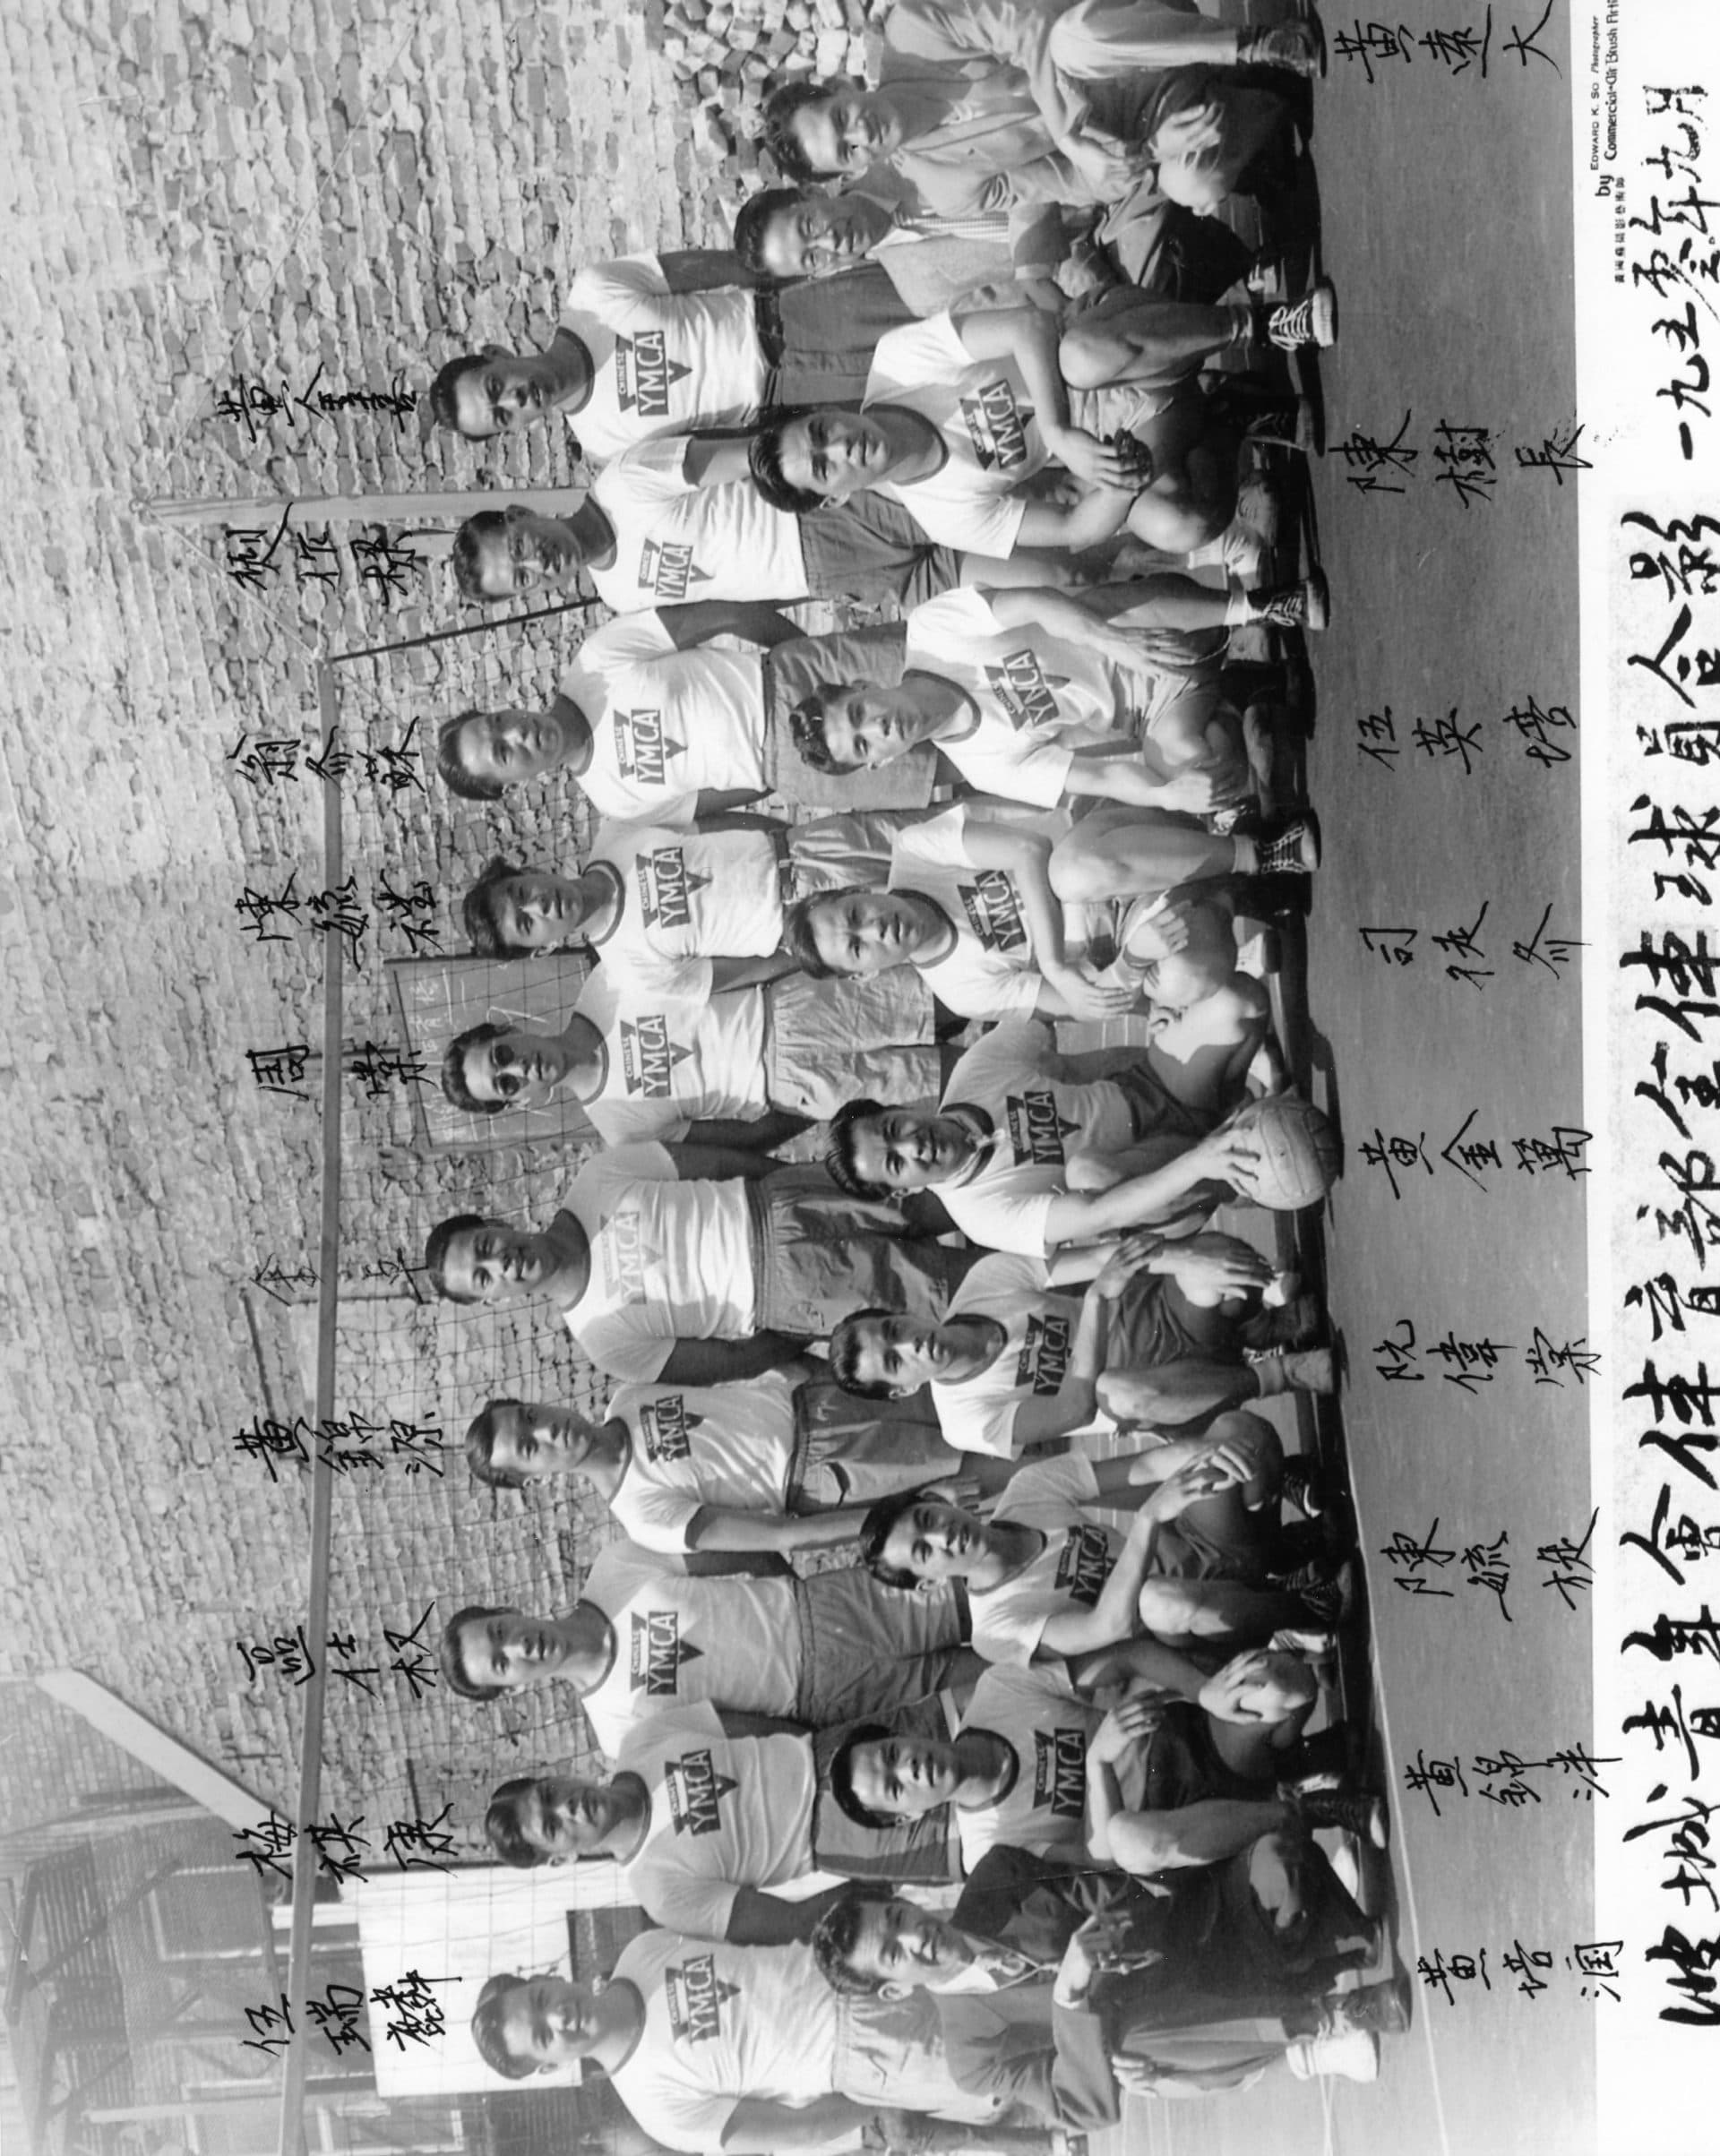 The Boston YMCA volleyball team posing for a group photograph in 1950. (Courtesy Chinese Historical Society of New England Sports Photography Collection)